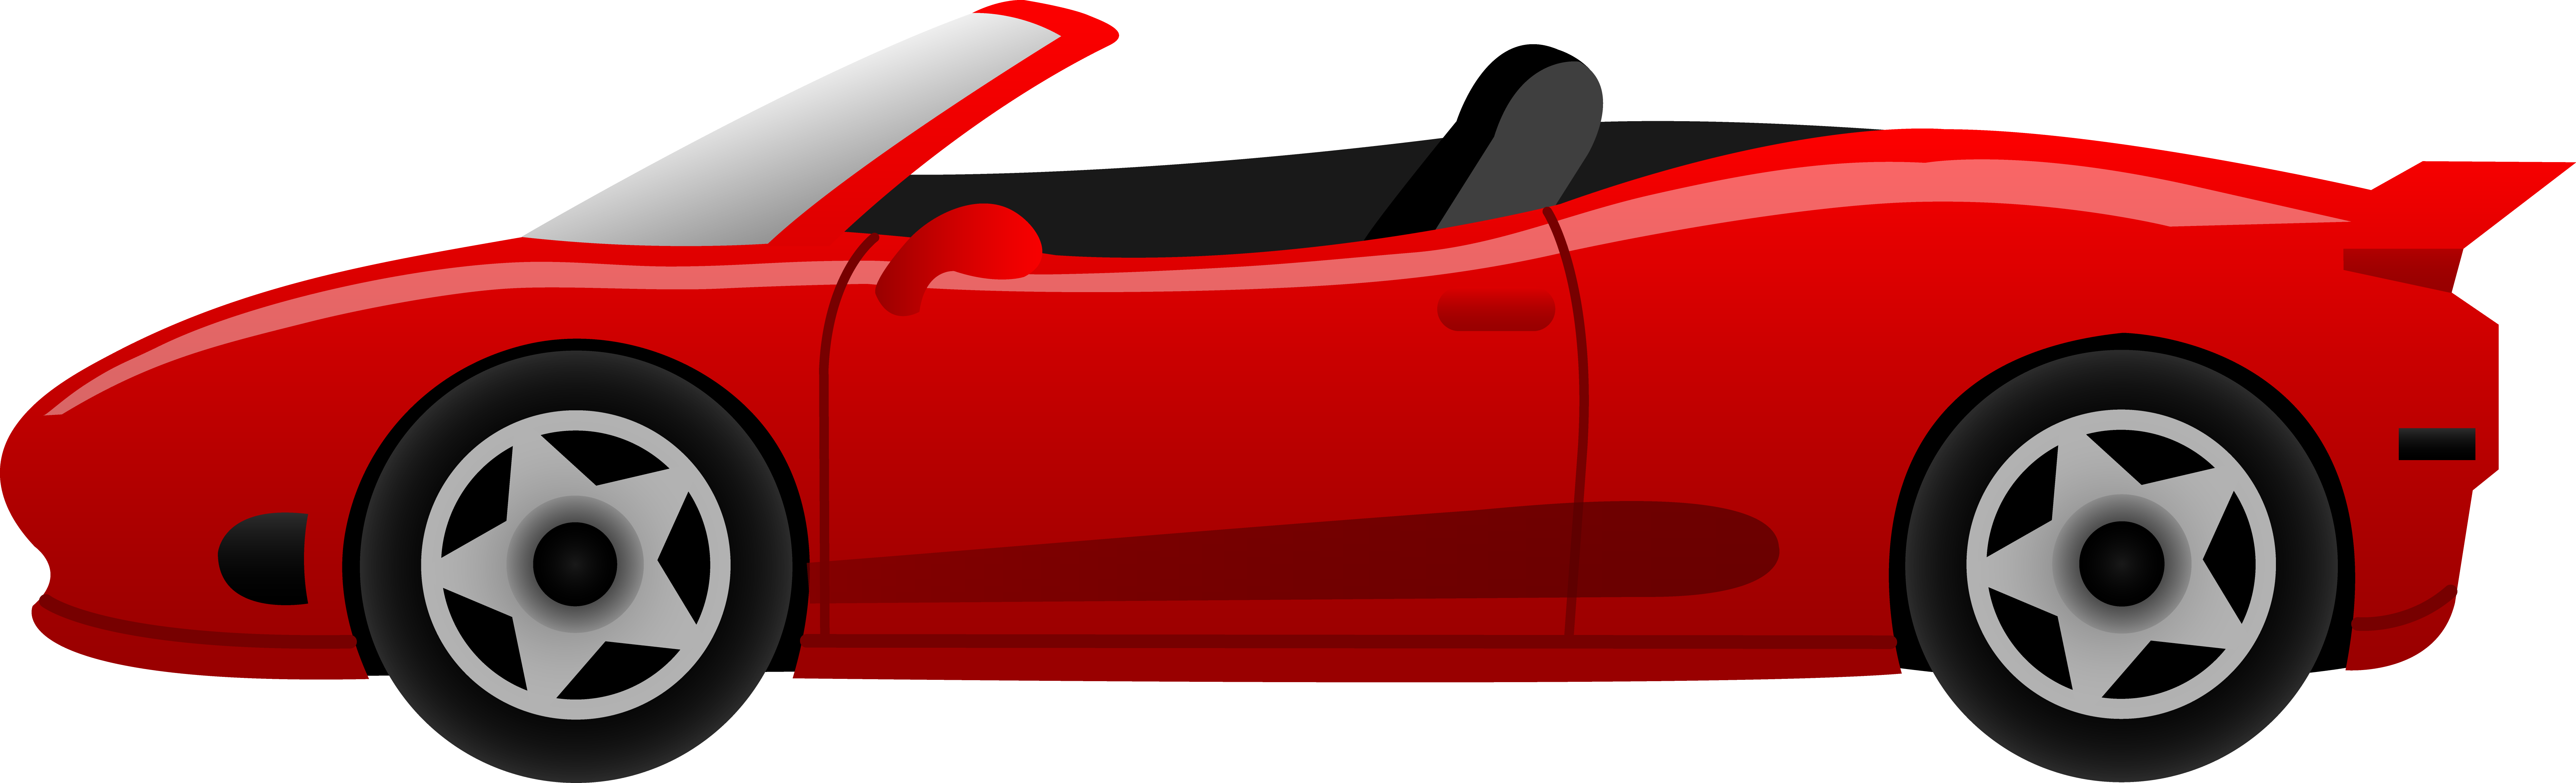 Car clipart red drawing